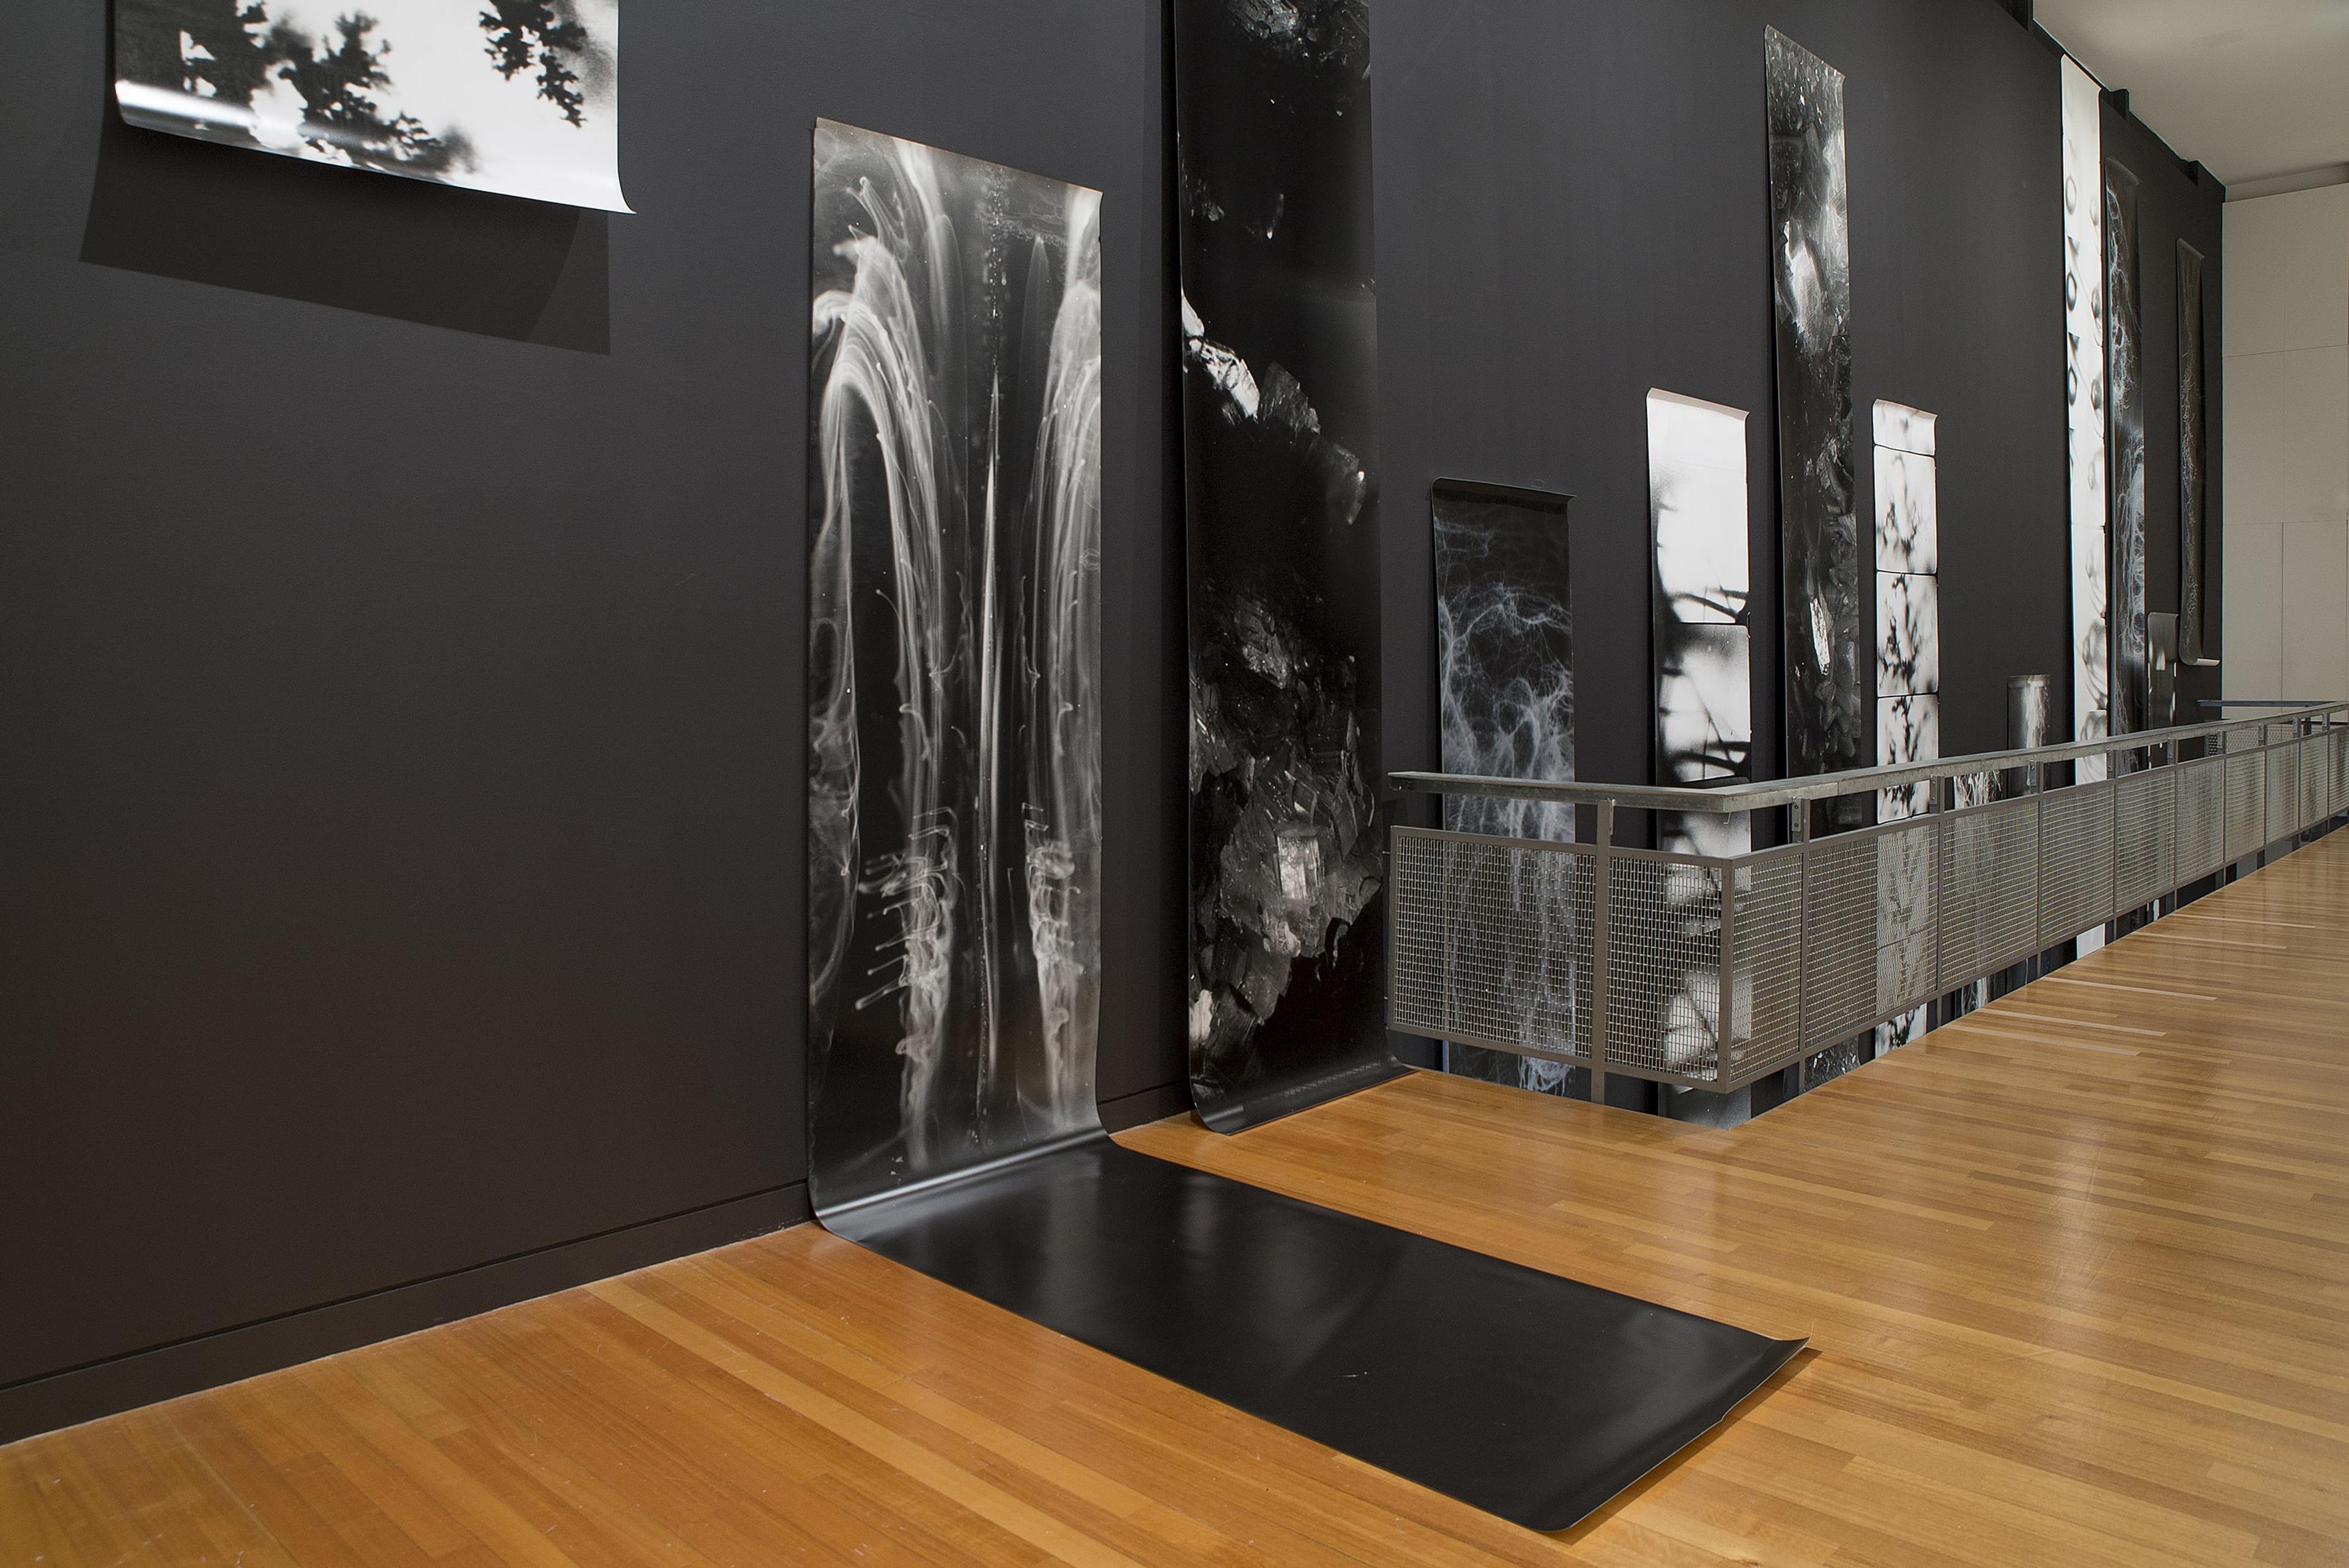 Joyce Campbell, As It Falls, 2004-2019, resin coated gelatin silver photographs. 